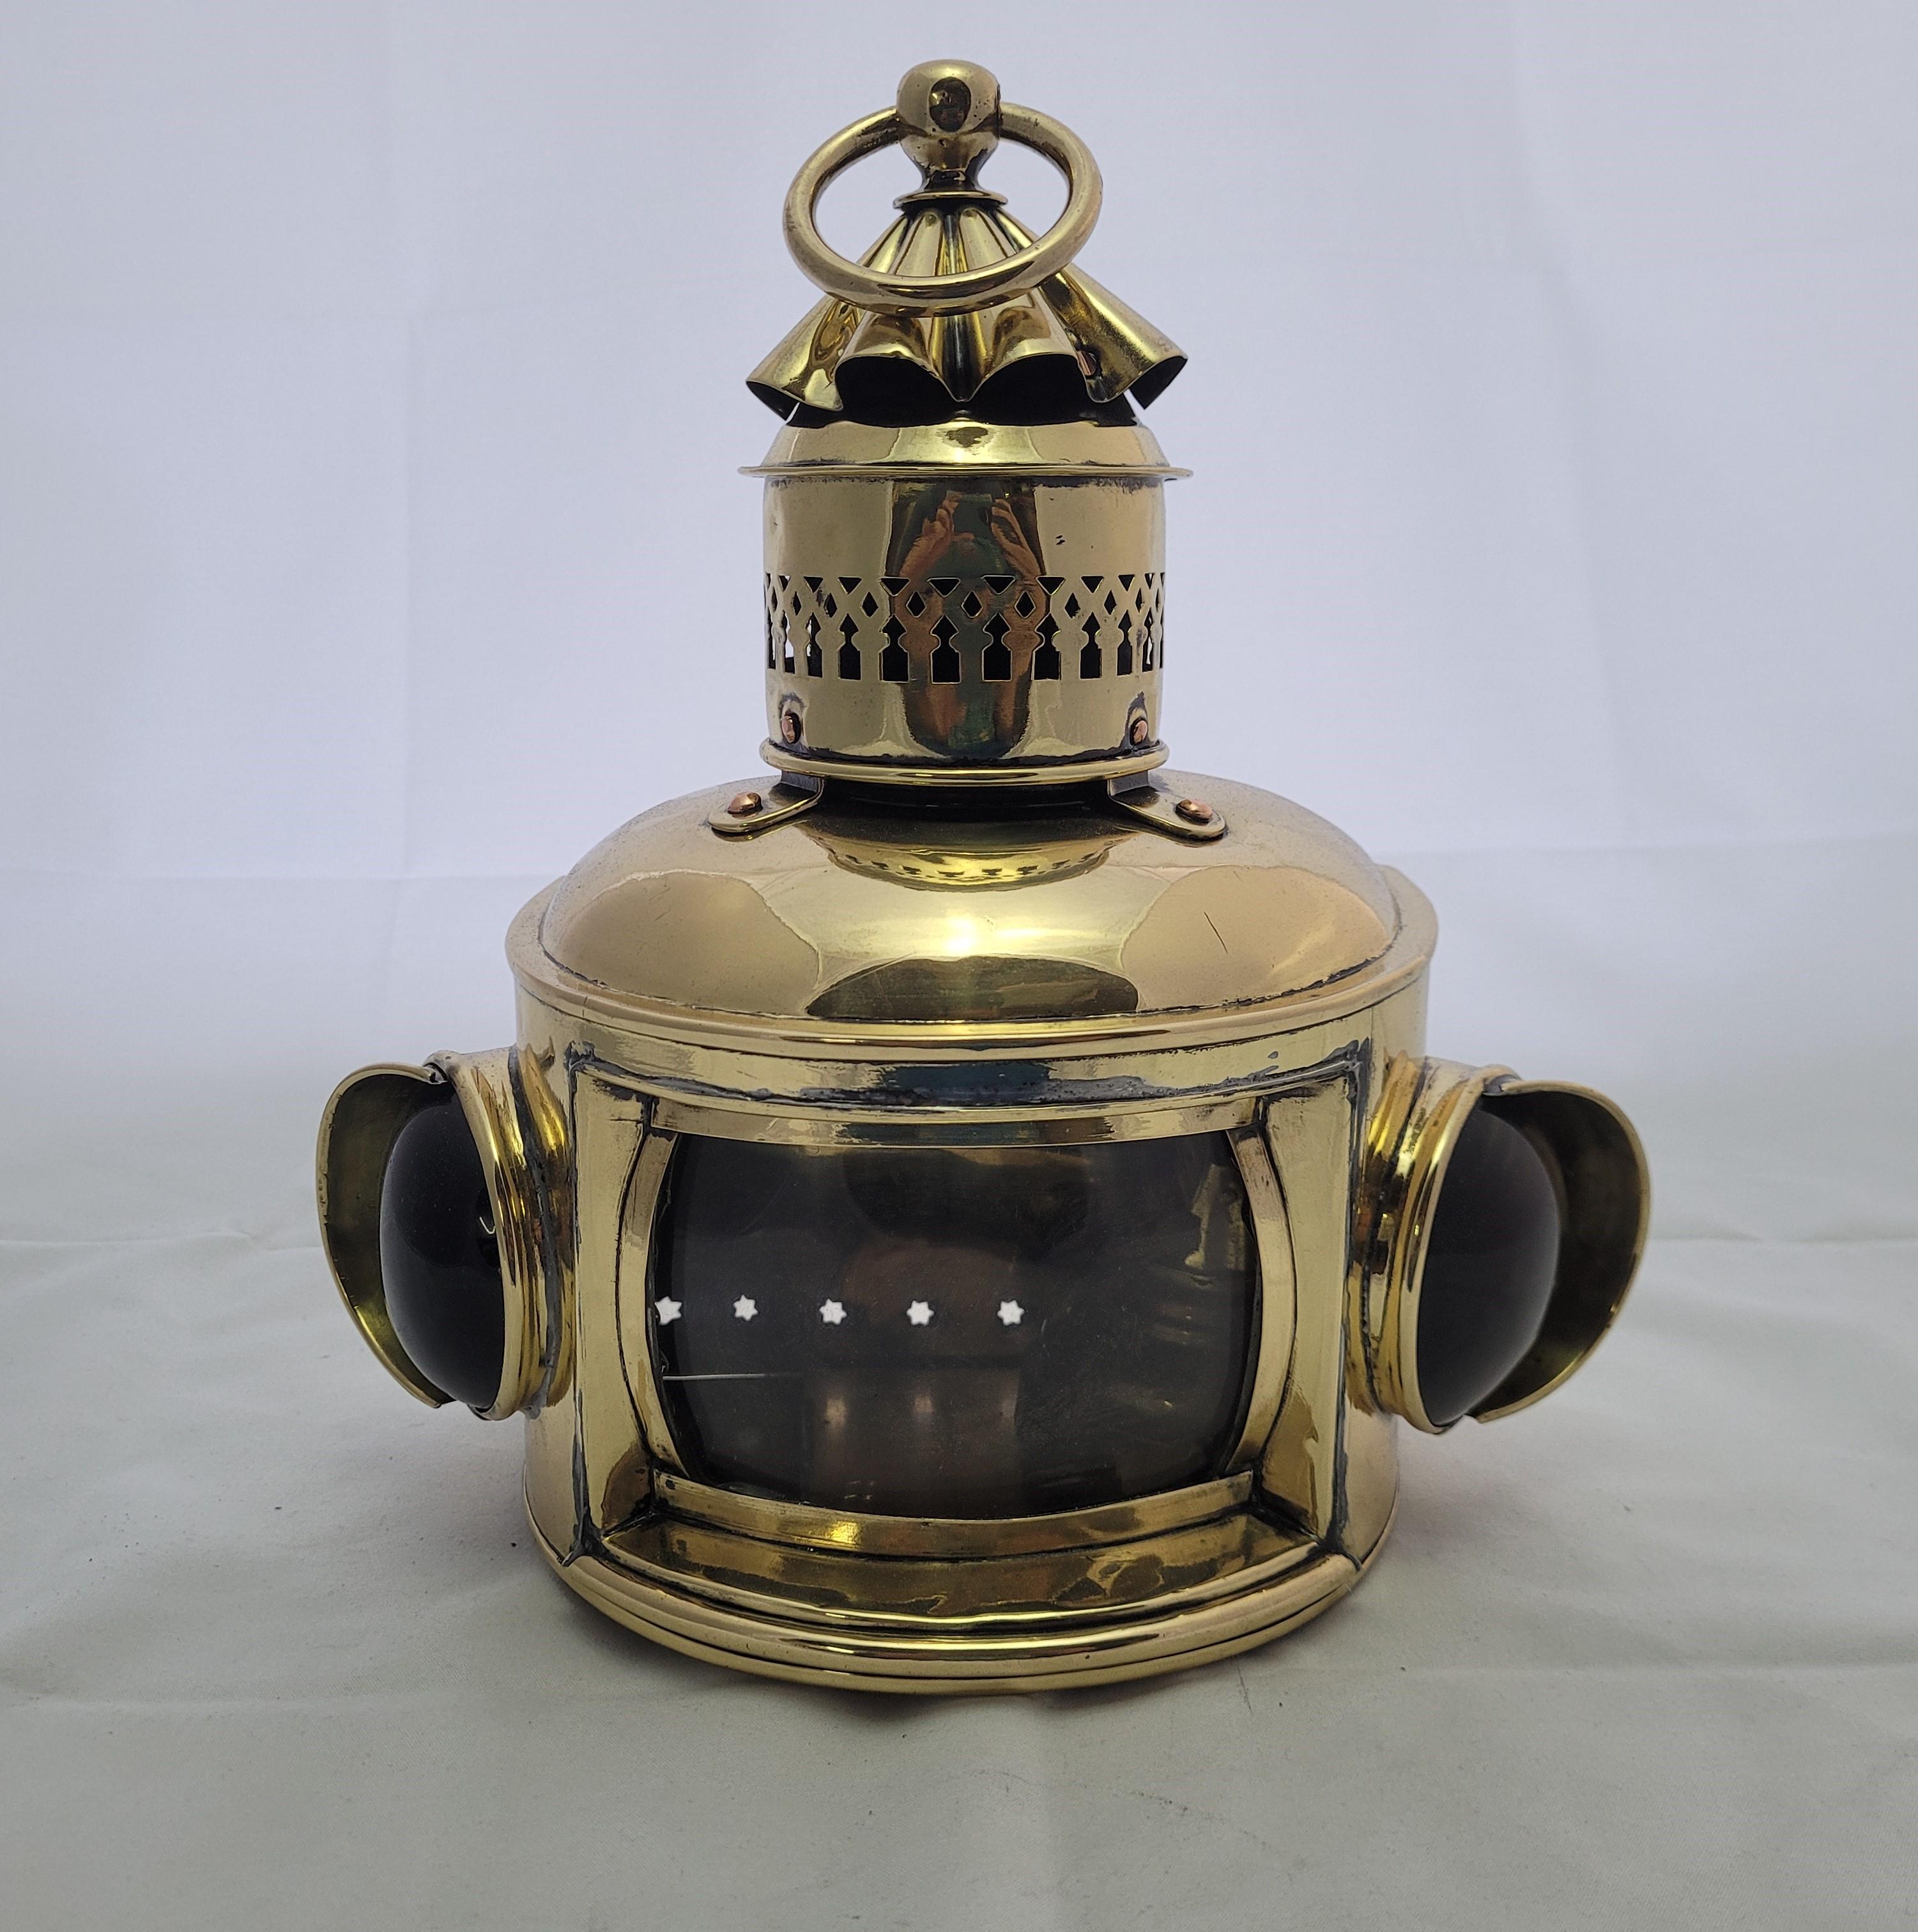 Choice antique nautical boat lantern with clear convex main lens and red and green bullsey lenses. With oil tank, burner and wick inside. Vented top with carry loop. Hinged rear door. Meticulously polished and lacquered. Fabulous antique ship